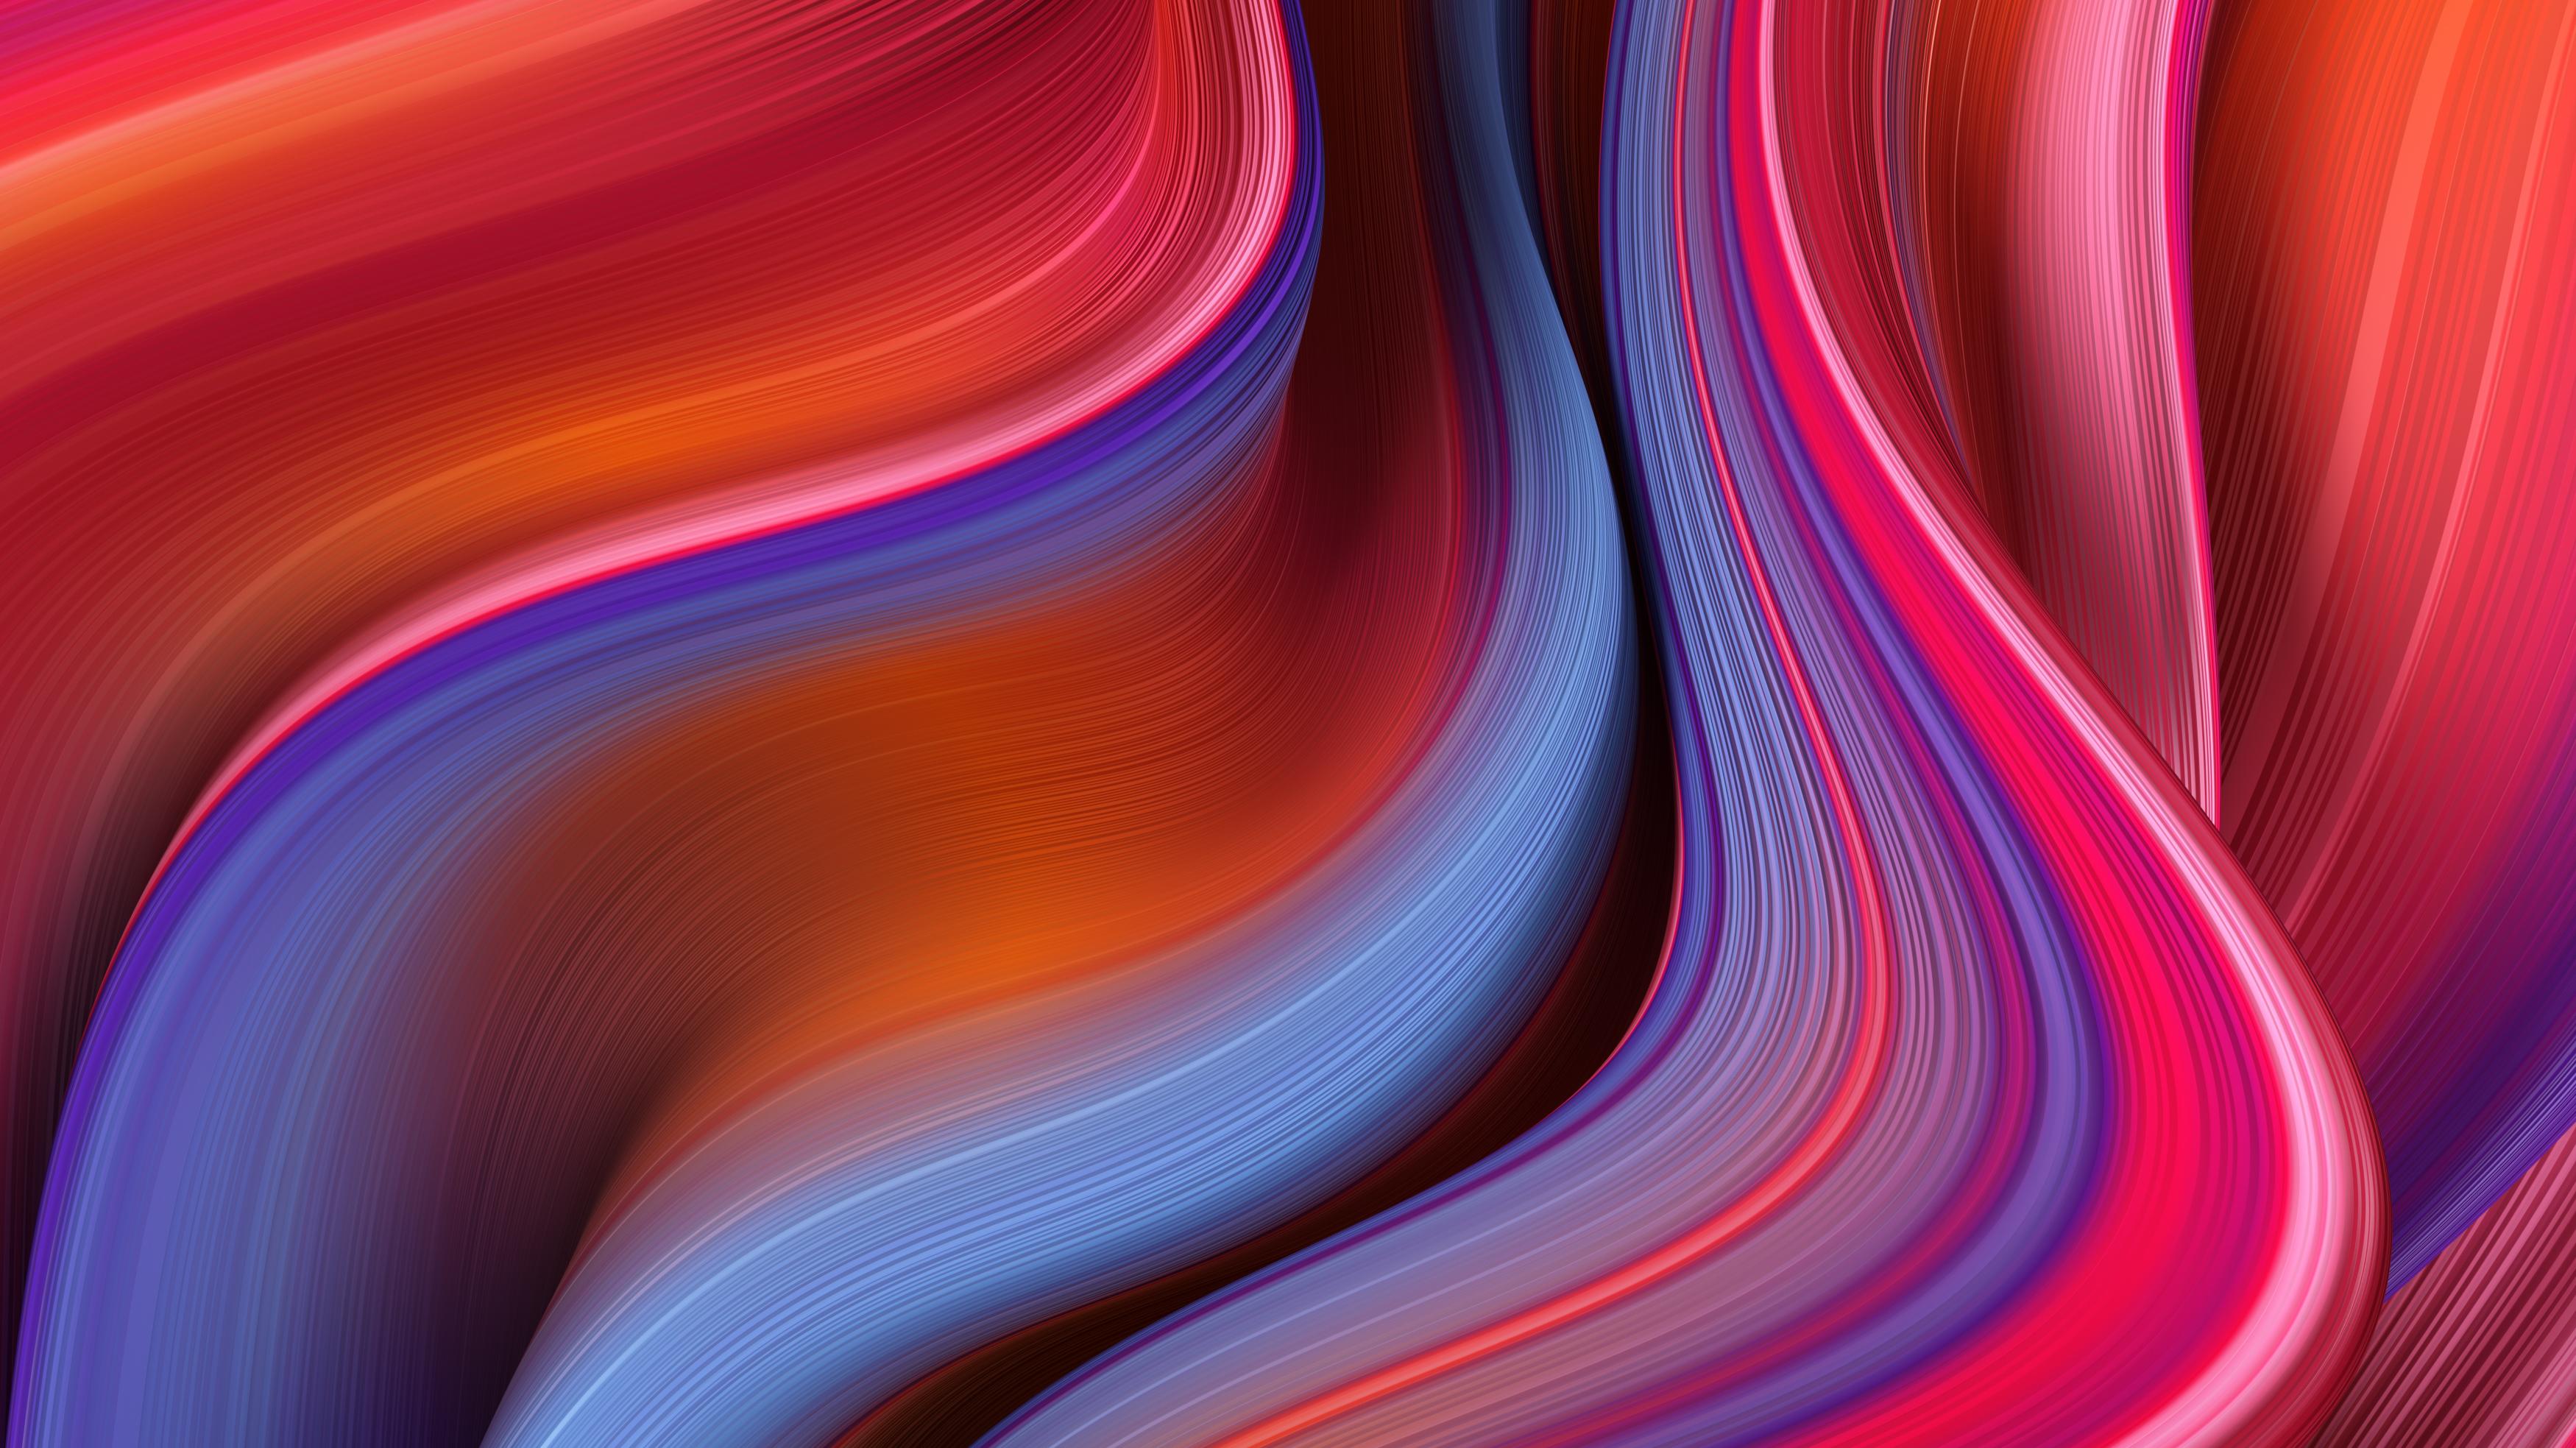 Abstract Wave HD Wallpaper By Danny Ivan